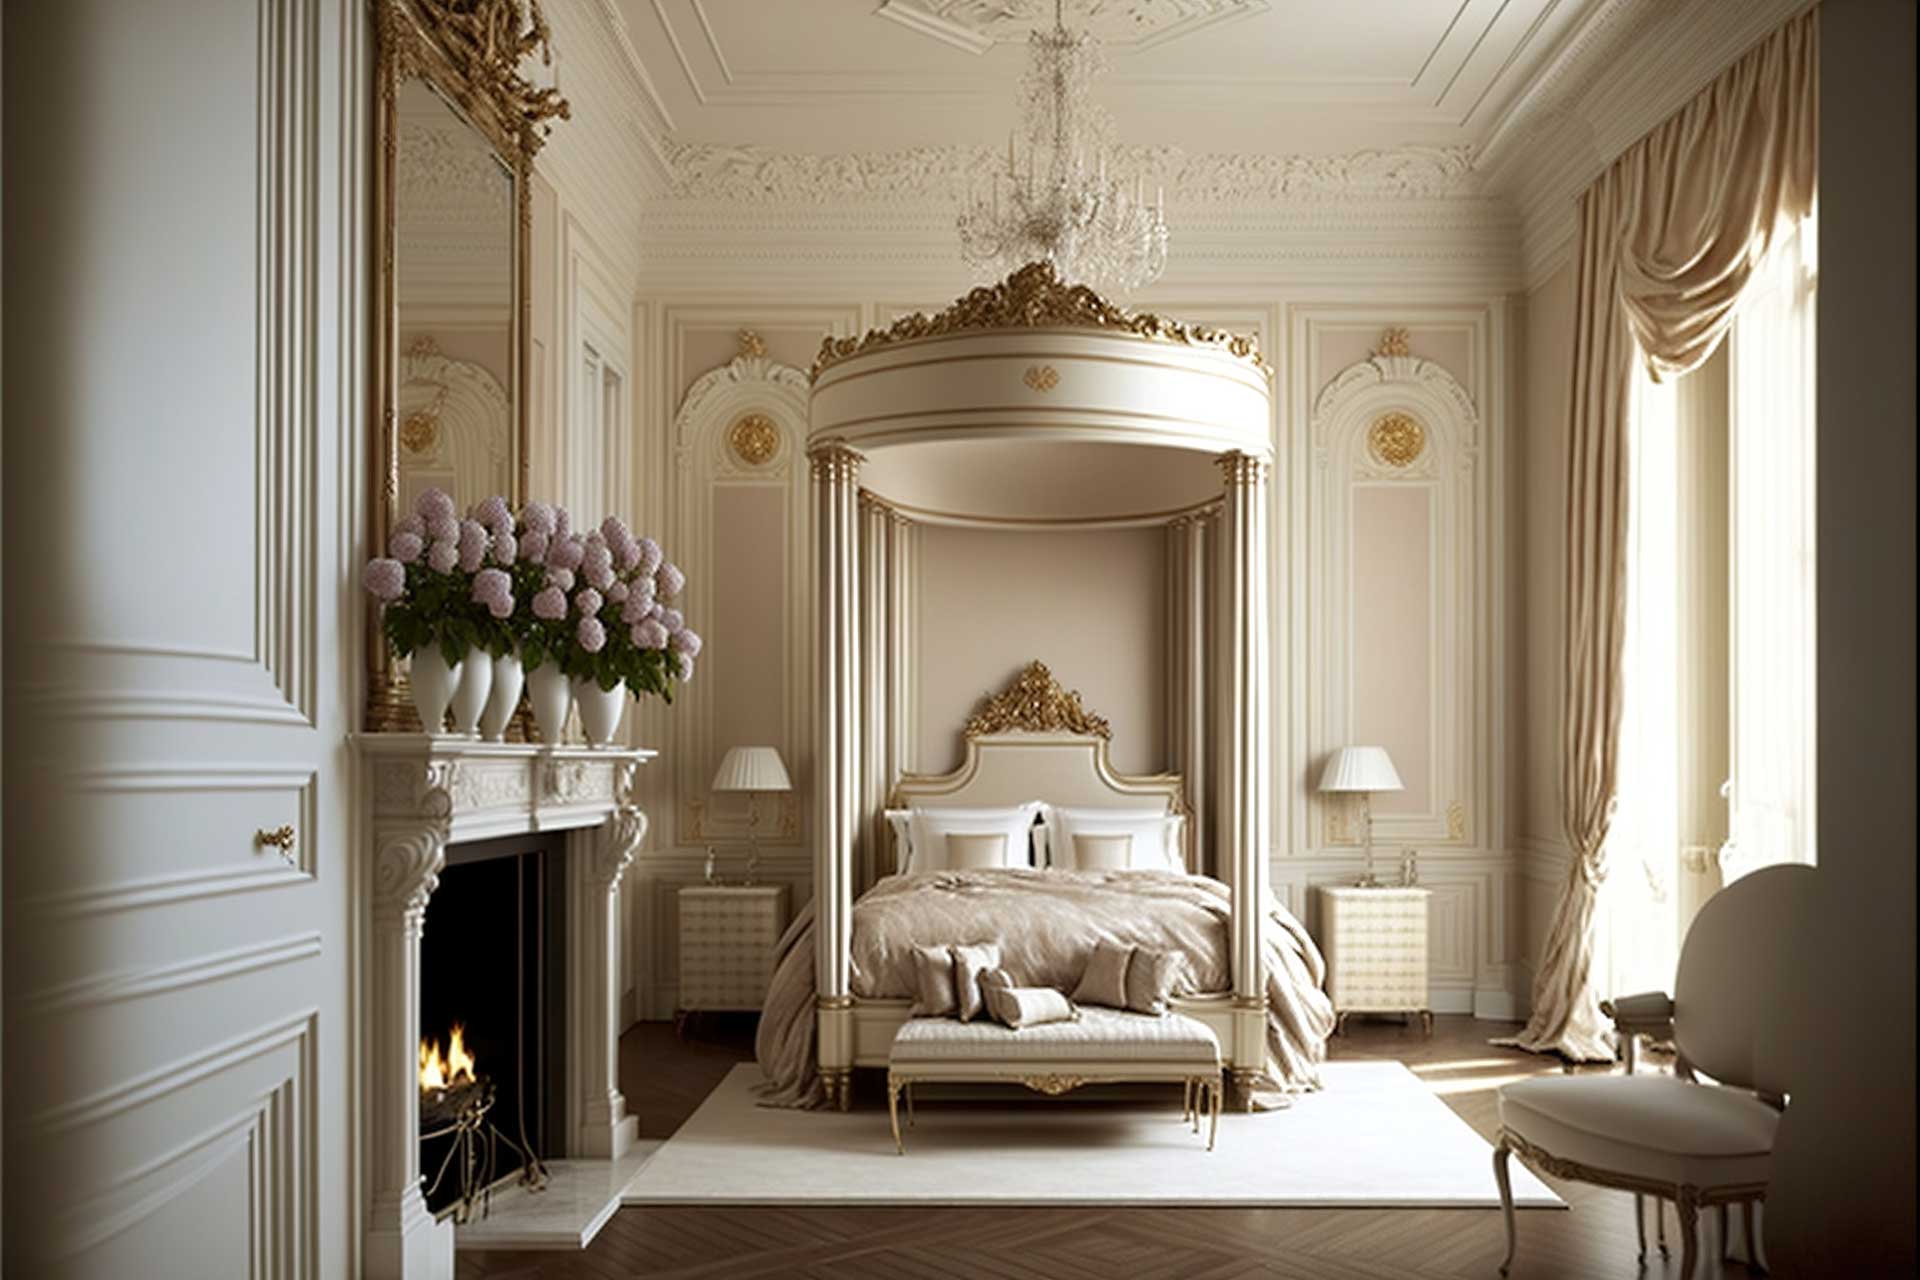 Traditional Bedroom With Luxurious Linens And Beautiful Antique Furnishings